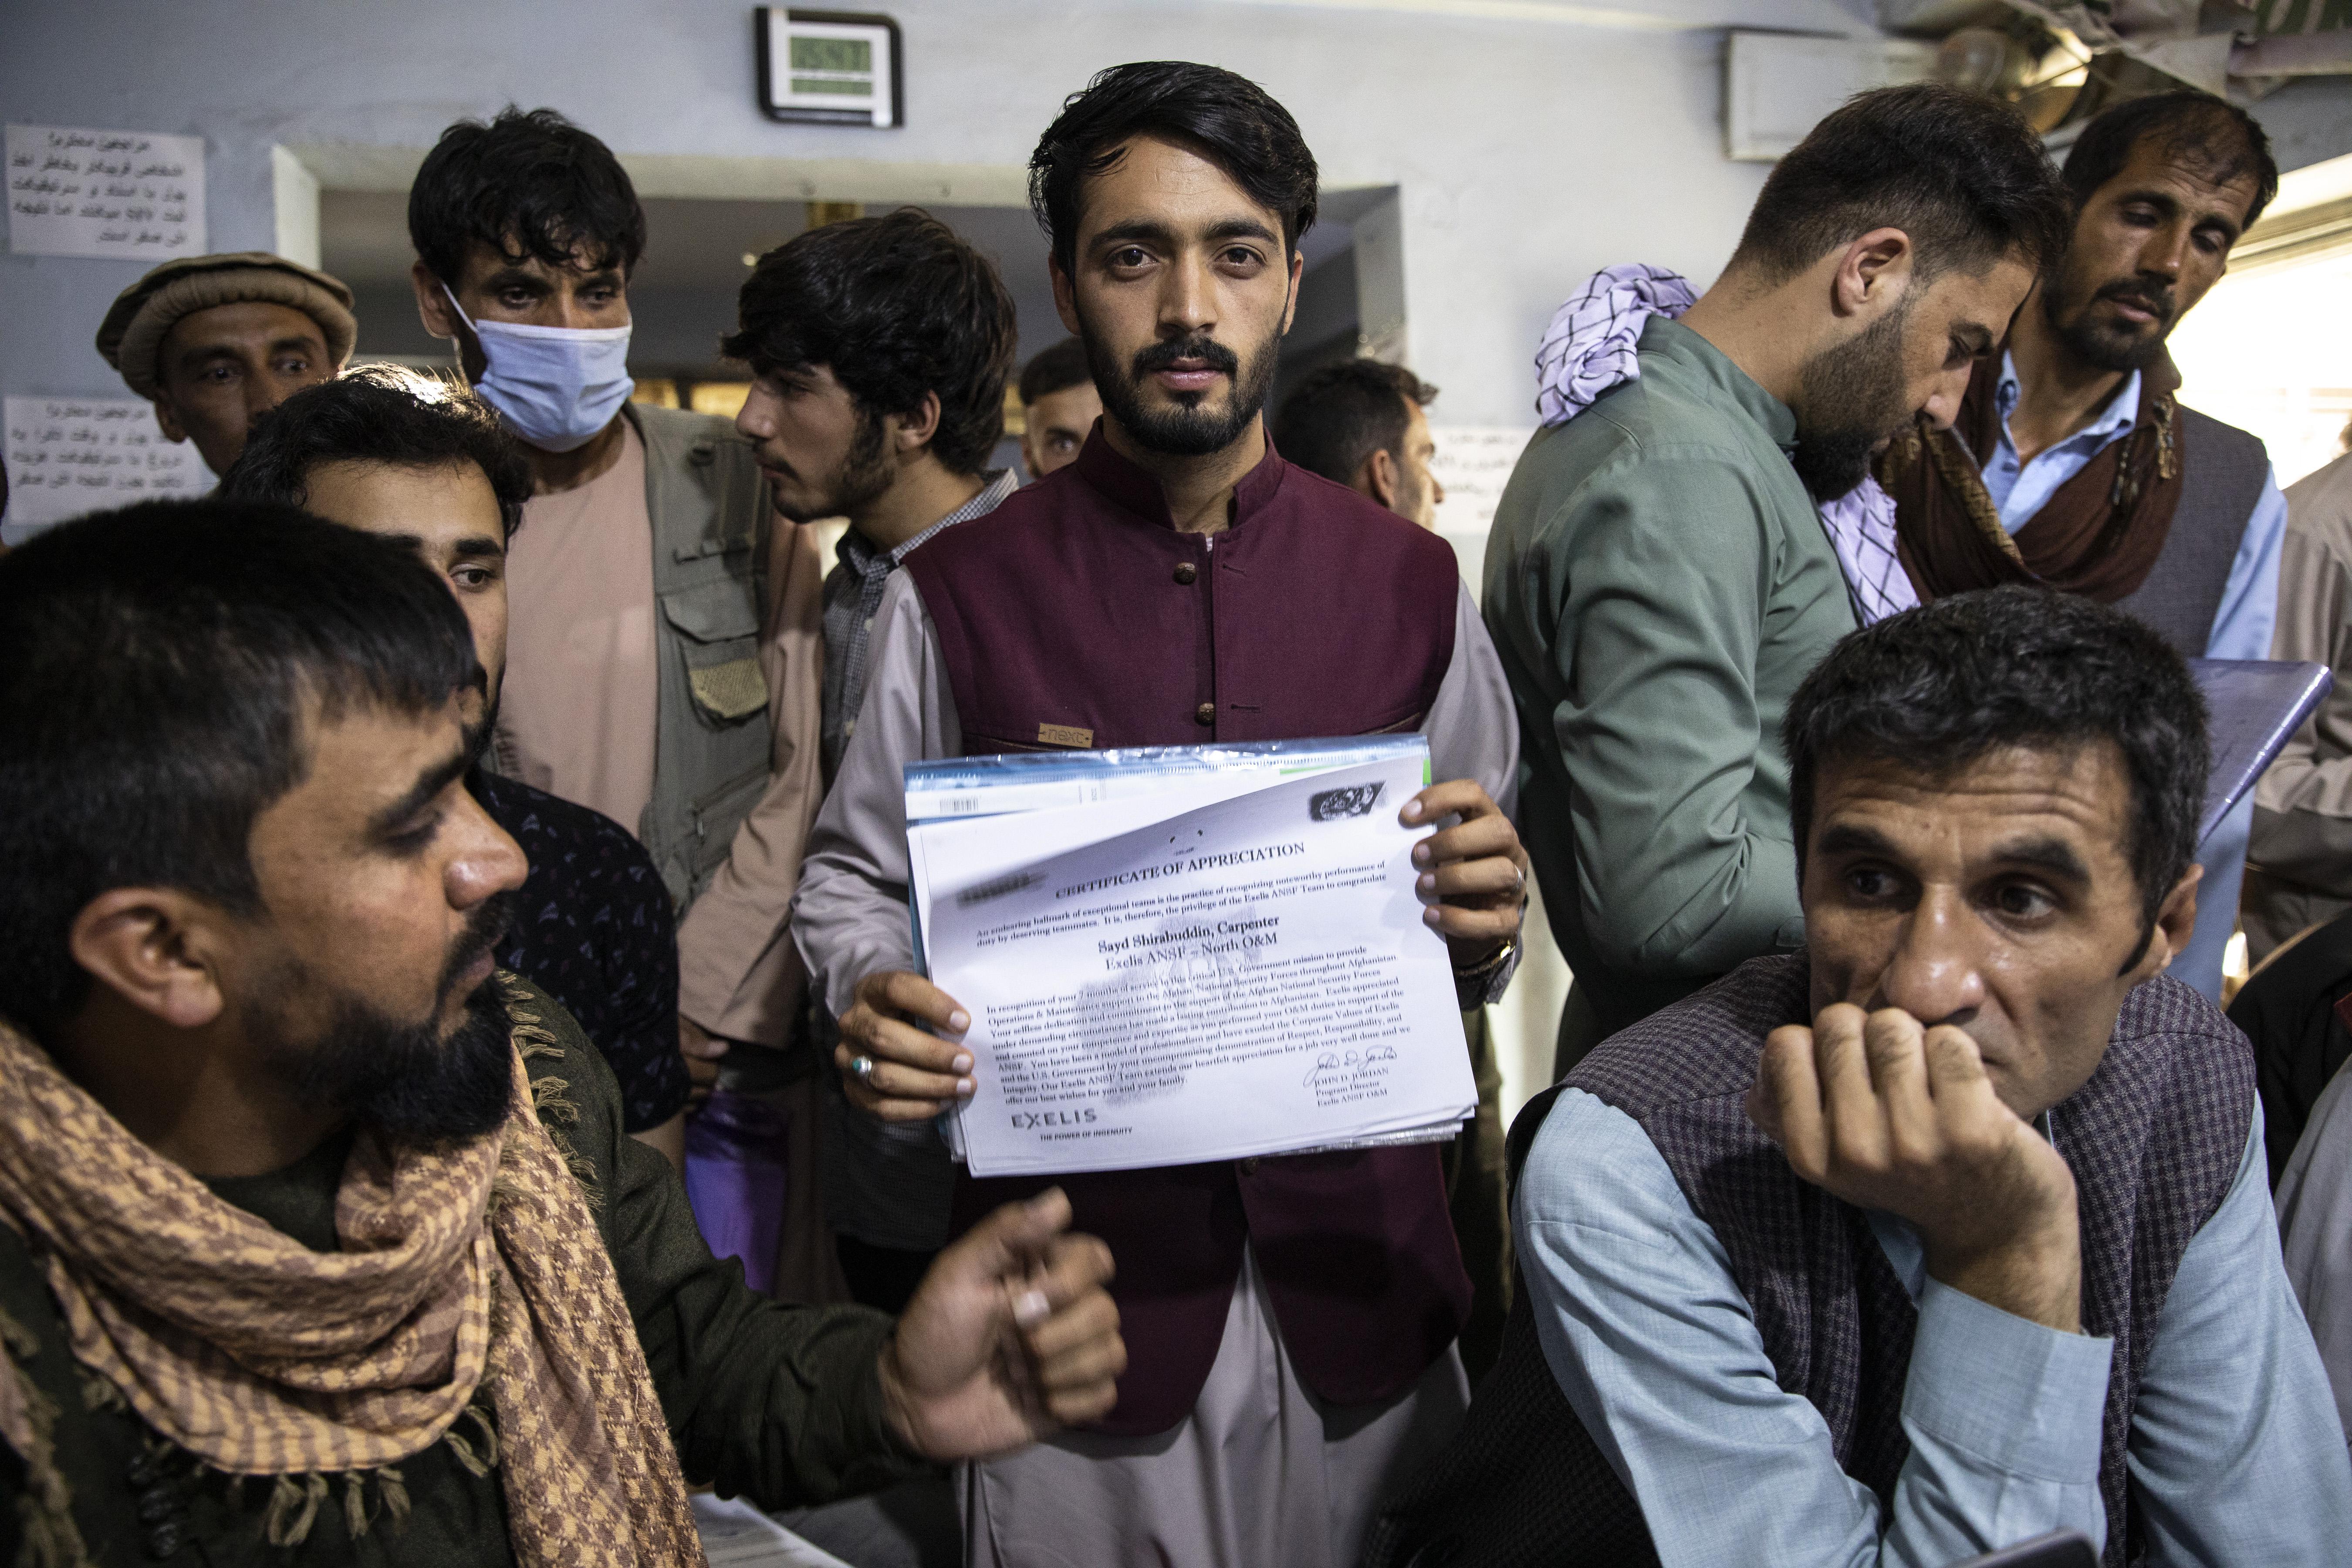 A man looks directly at the camera holding up his certificate amid a crowd of people